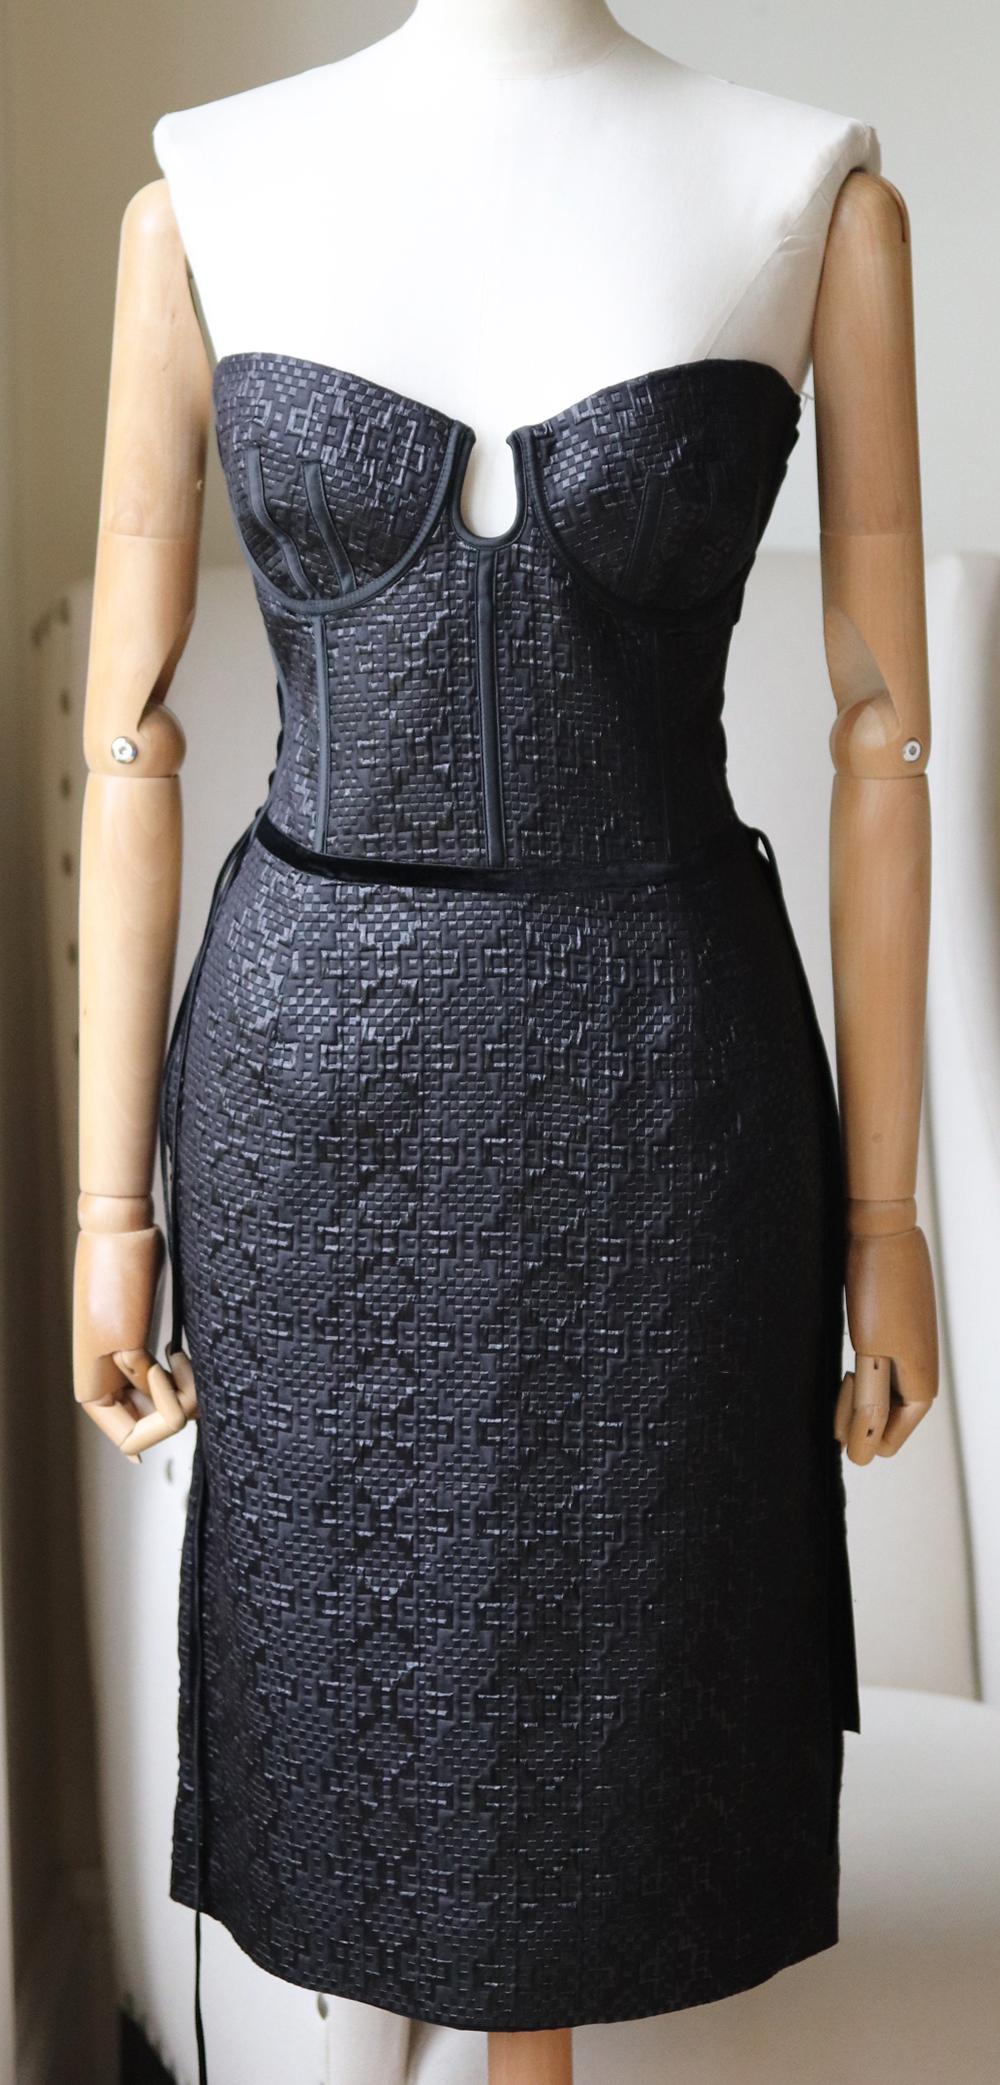 Chic and sophisticated, Bottega Veneta has put the brand's intrecciato technique to use with this dress using a strapless bodice that's boned for structure and contrasting velvet lace-up detail at the sides.
Black silk-blend.
Concealed hook and zip